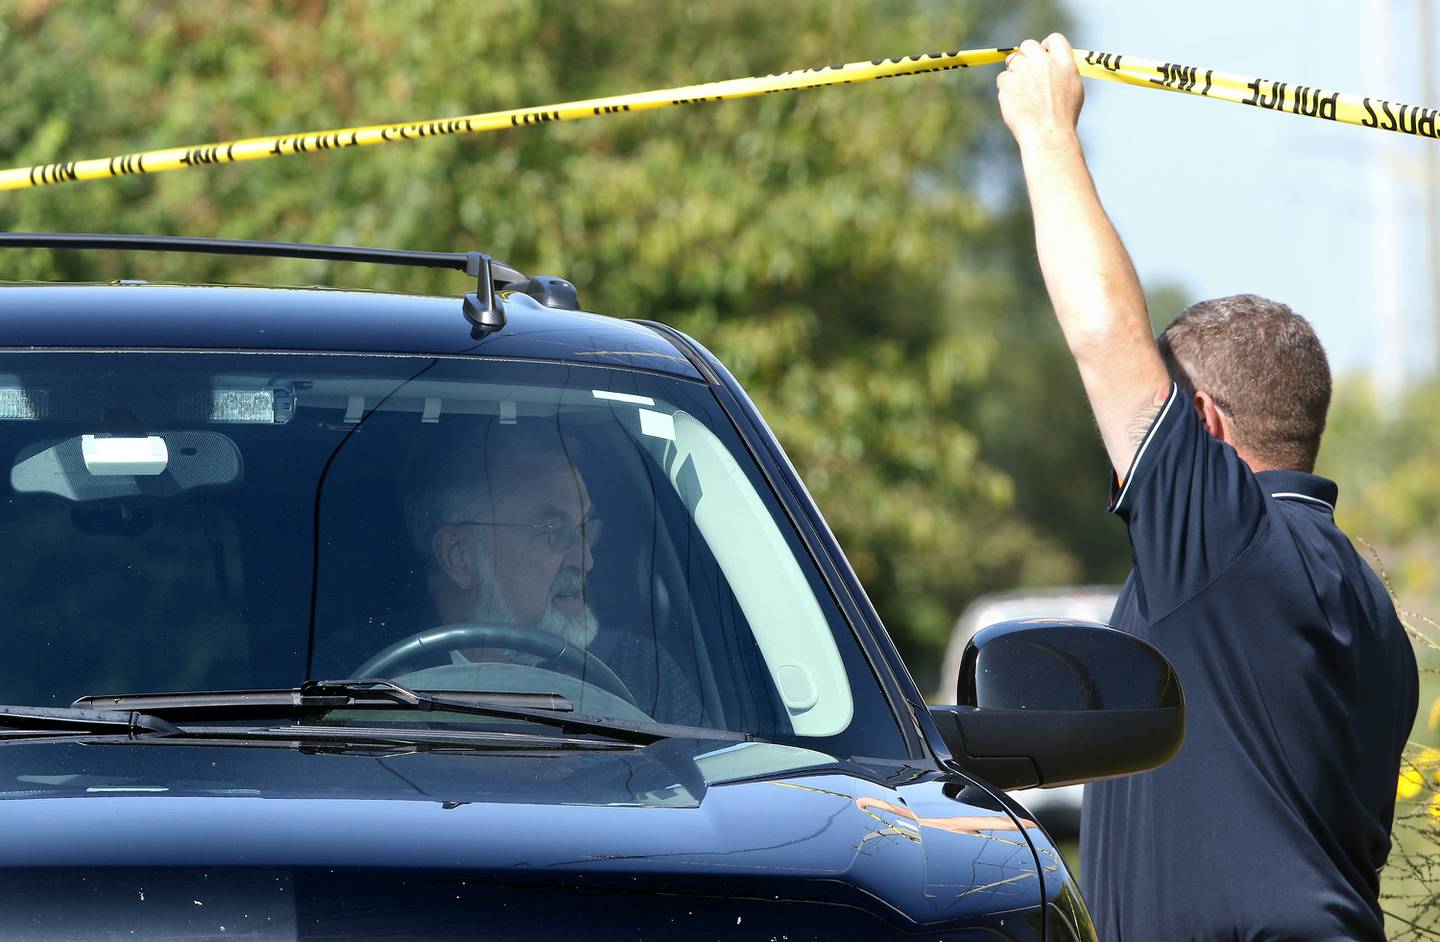 DeKalb County Coroner Dennis Miller leaves the scene of a death investigation in this Shaw Local file photo on Wednesday, Sep. 13, 2017, in DeKalb.